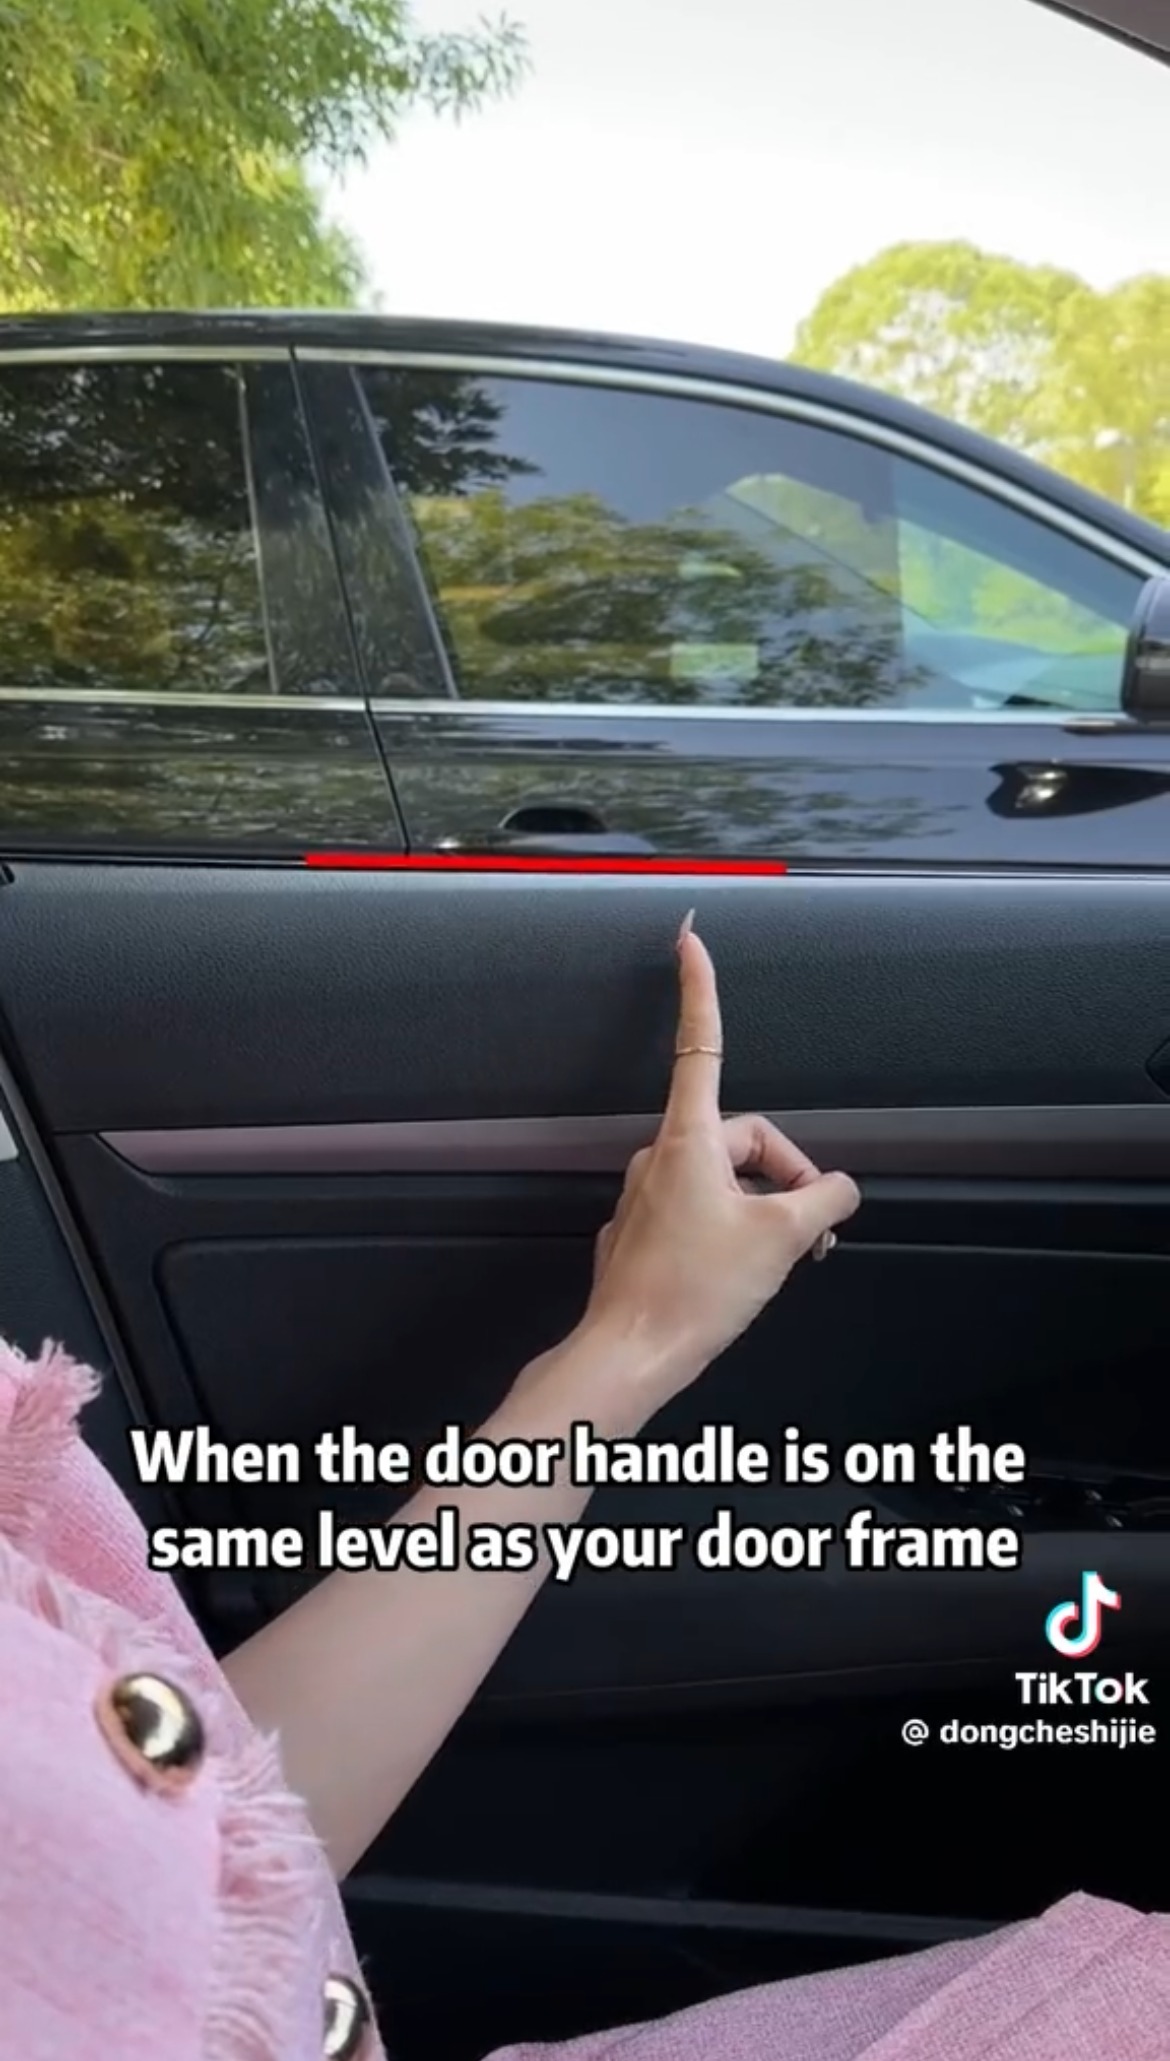 The first is for making sure you don't hit other cars when opening your door